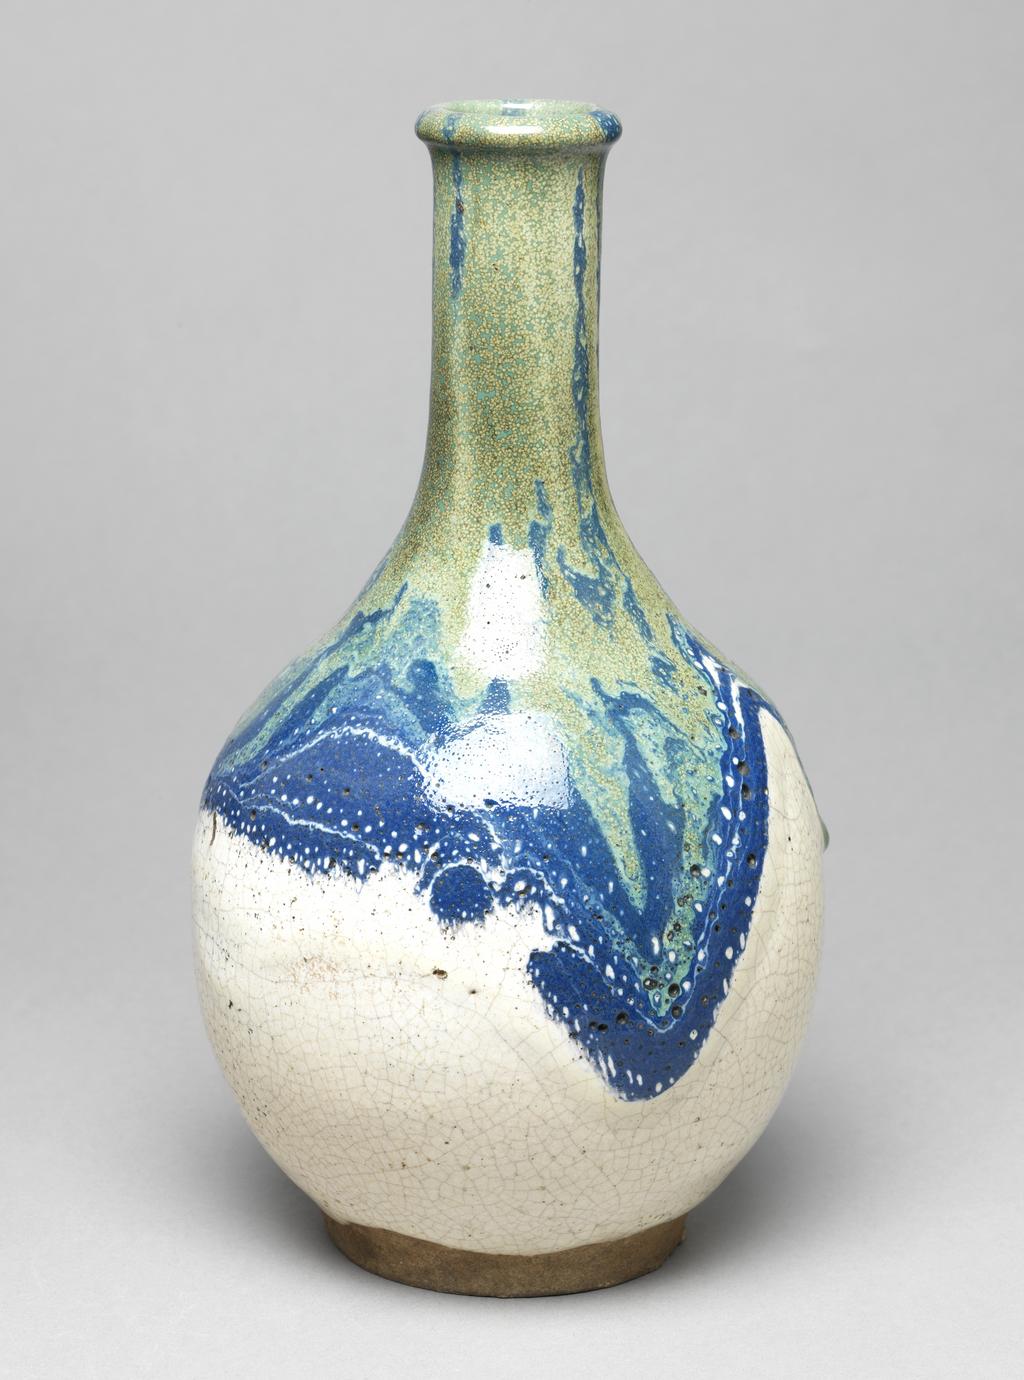 An image of Japanese pottery. Sake bottle. Unknown pottery, perhaps, Japan, Narita. Sake bottle of globular form with long neck. Buff body, thrown and turned. Cream glaze, the neck and shoulders covered with pours in blue and green. Heavy pitting visible. Stoneware, glazed, height 25.30 cm, diameter, rim, 4.30 cm, diameter, bottle, 14.10 cm, diameter, base, 8.20 cm, circa 1875-circa 1925. Meiji Period (1868-1912).